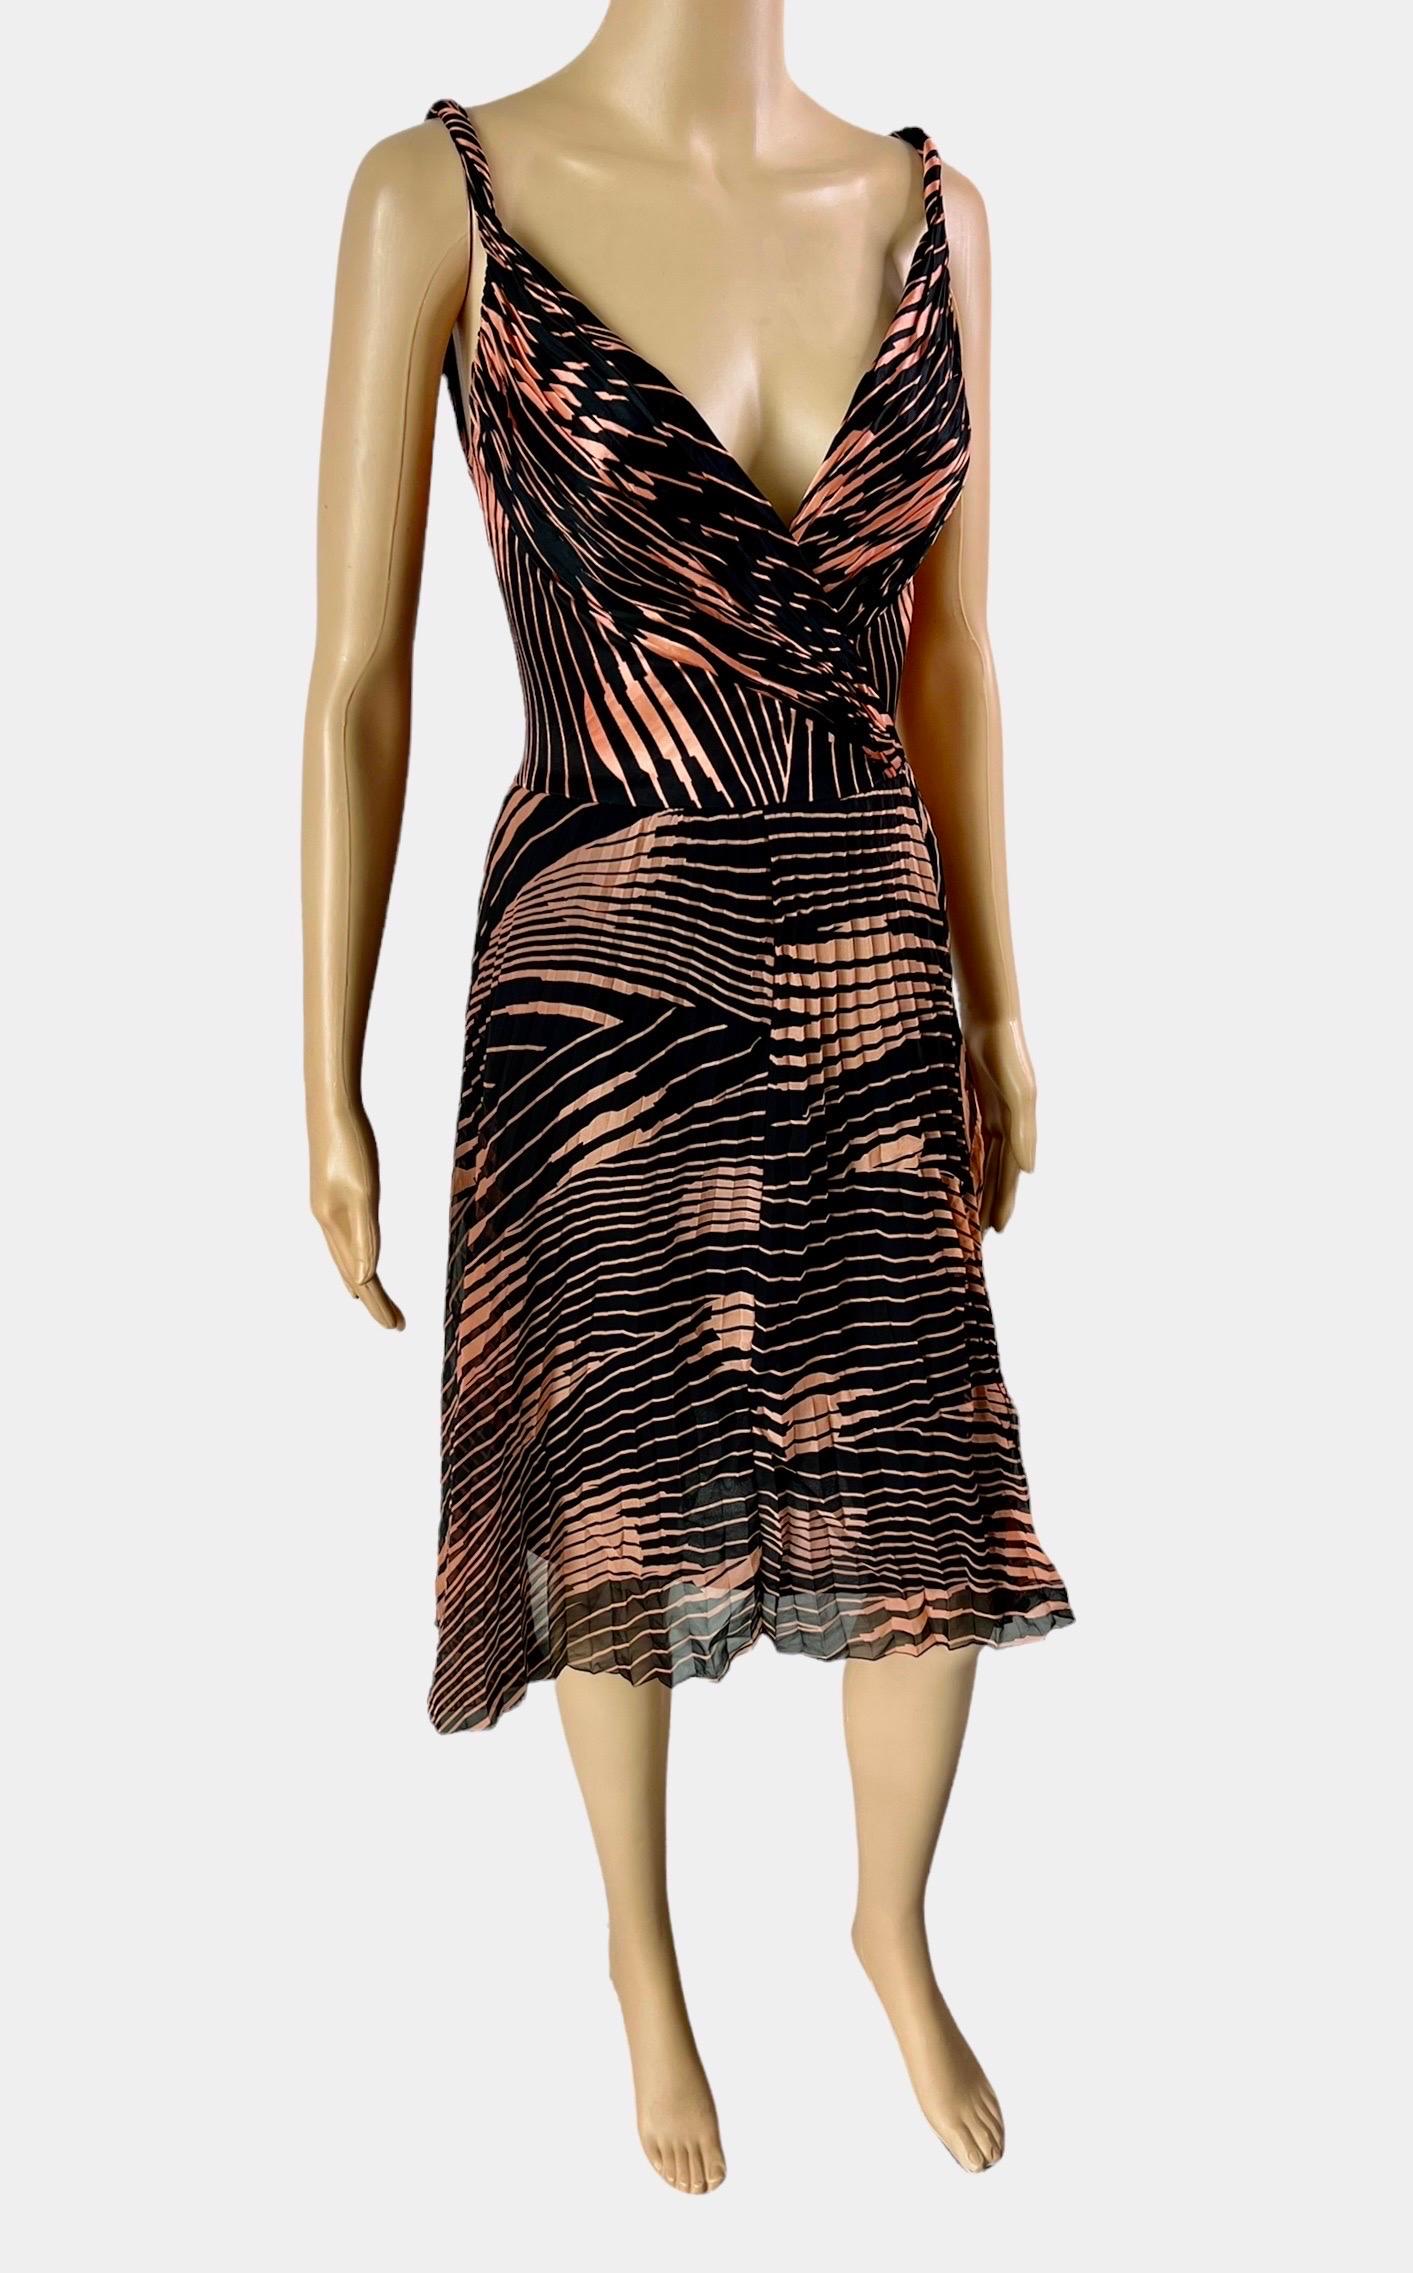 Gianni Versace c.2001 Plunged Bustier Open Back Geometric Abstract Print Dress In Good Condition For Sale In Naples, FL